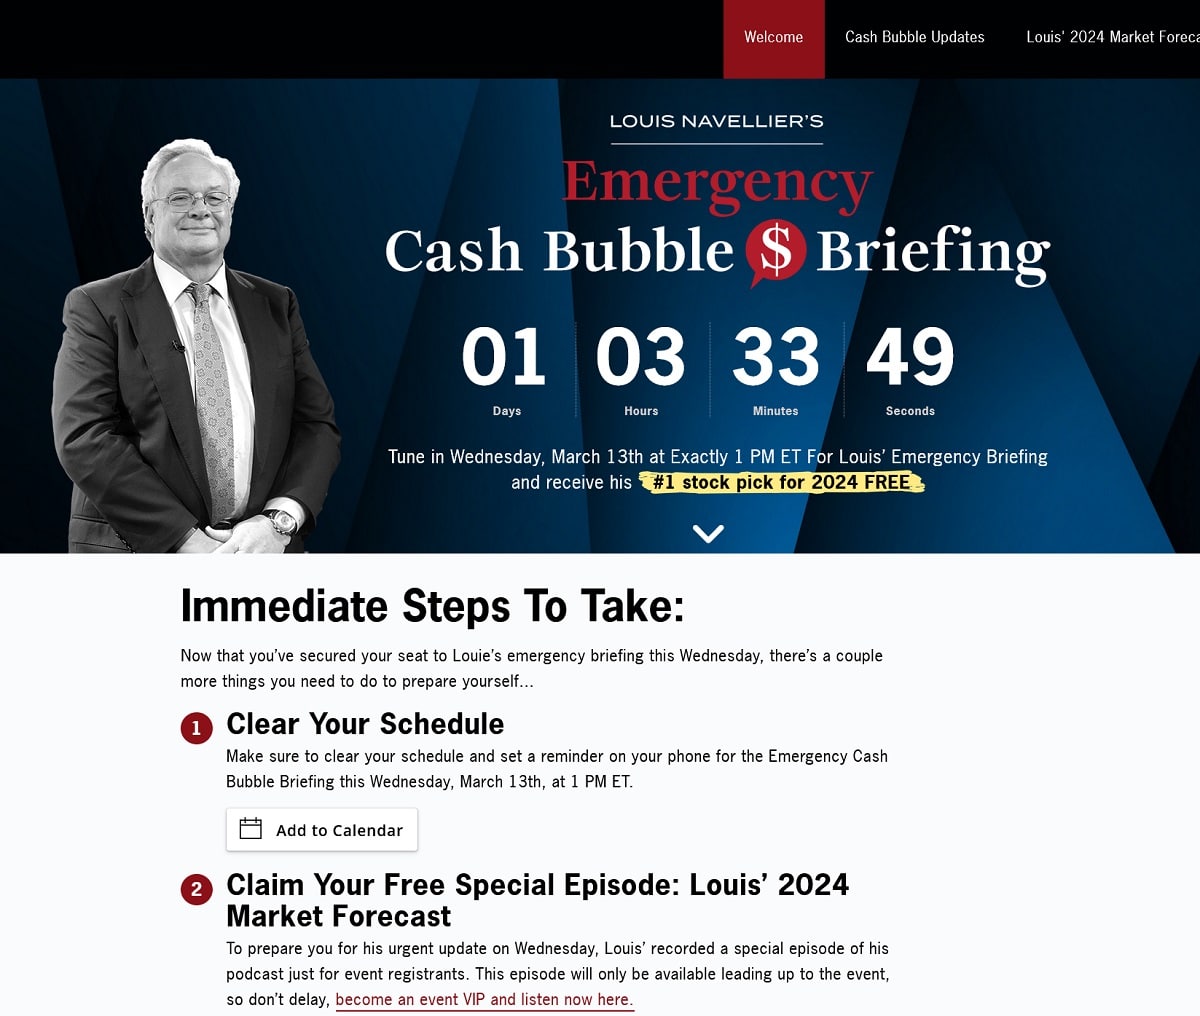 Louis Navellier’s Emergency Cash Bubble Briefing